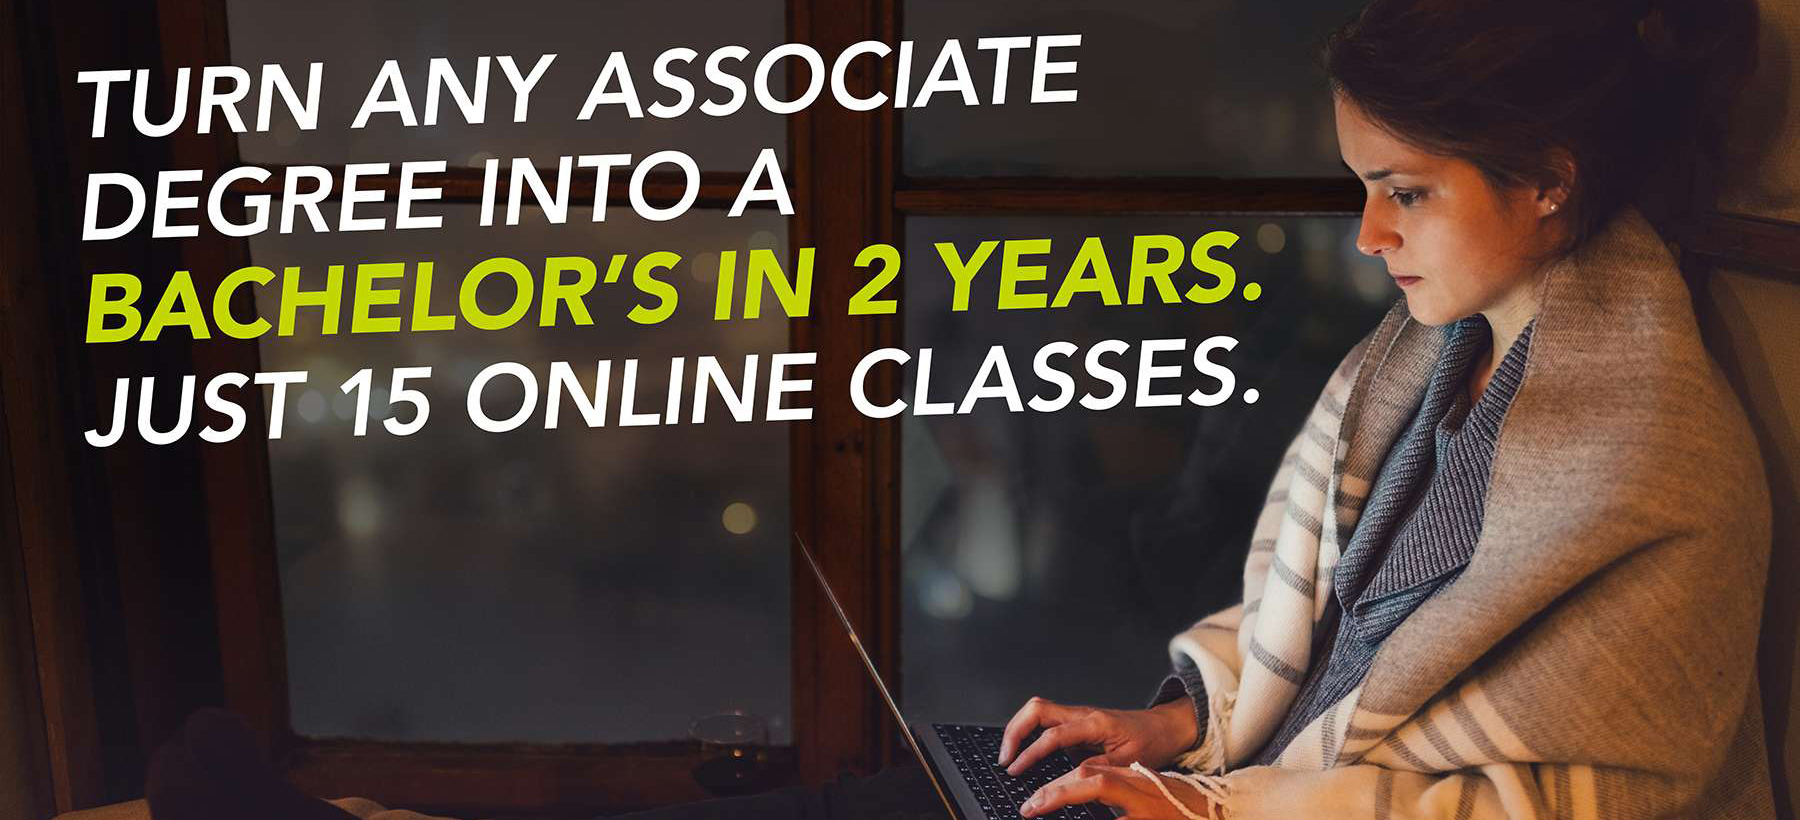 Turn any associate degree into a bachelor's in 2 years. Just 15 online classes. 